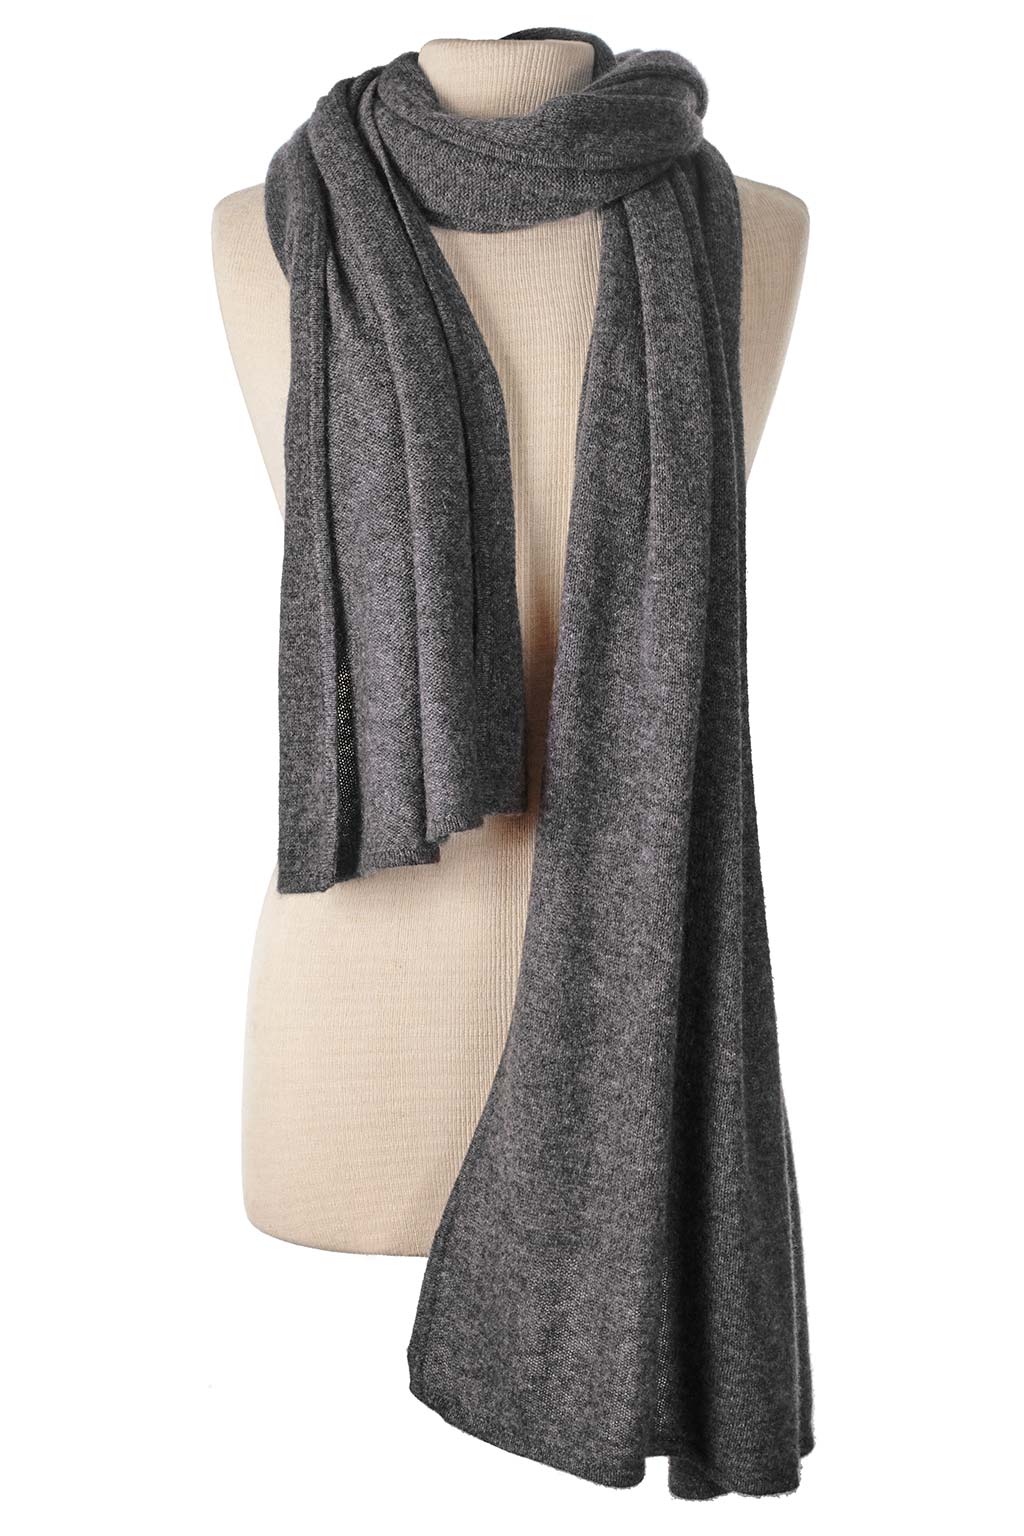 Alpine Cashmere Passport Travel Wrap in Charcoal Gray